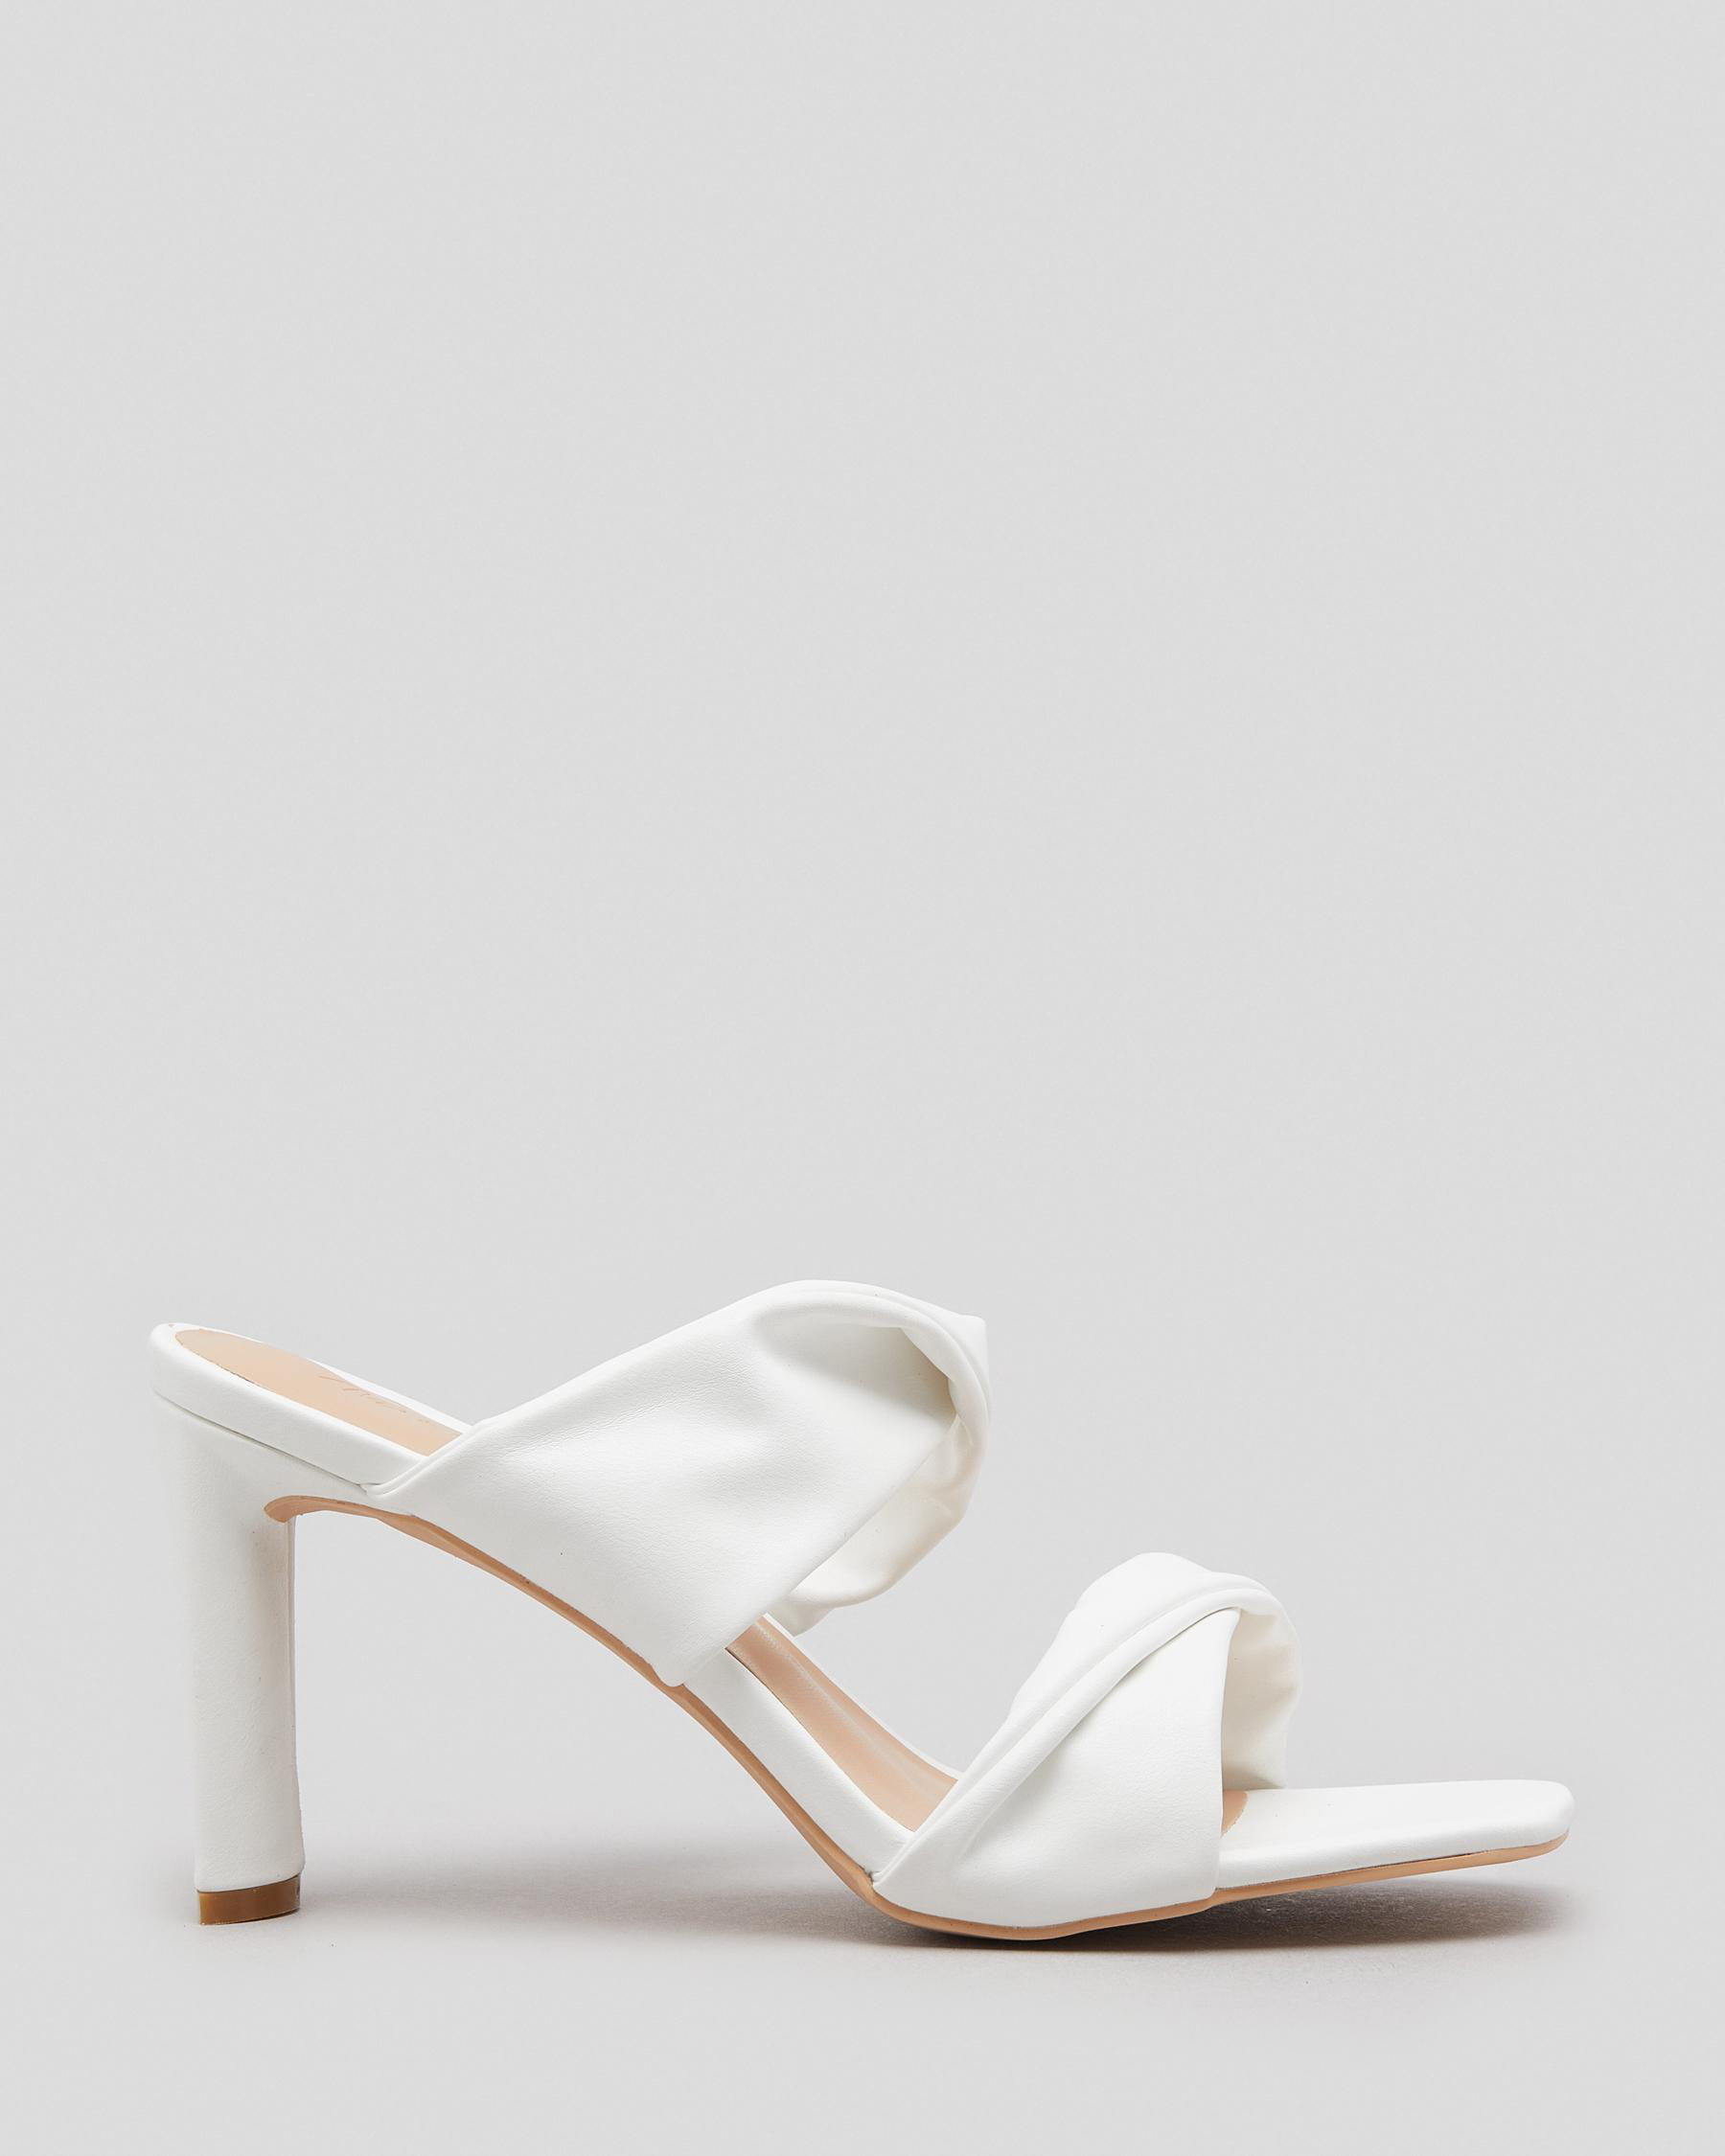 Shop Ava And Ever Hardin Heels In White - Fast Shipping & Easy Returns ...